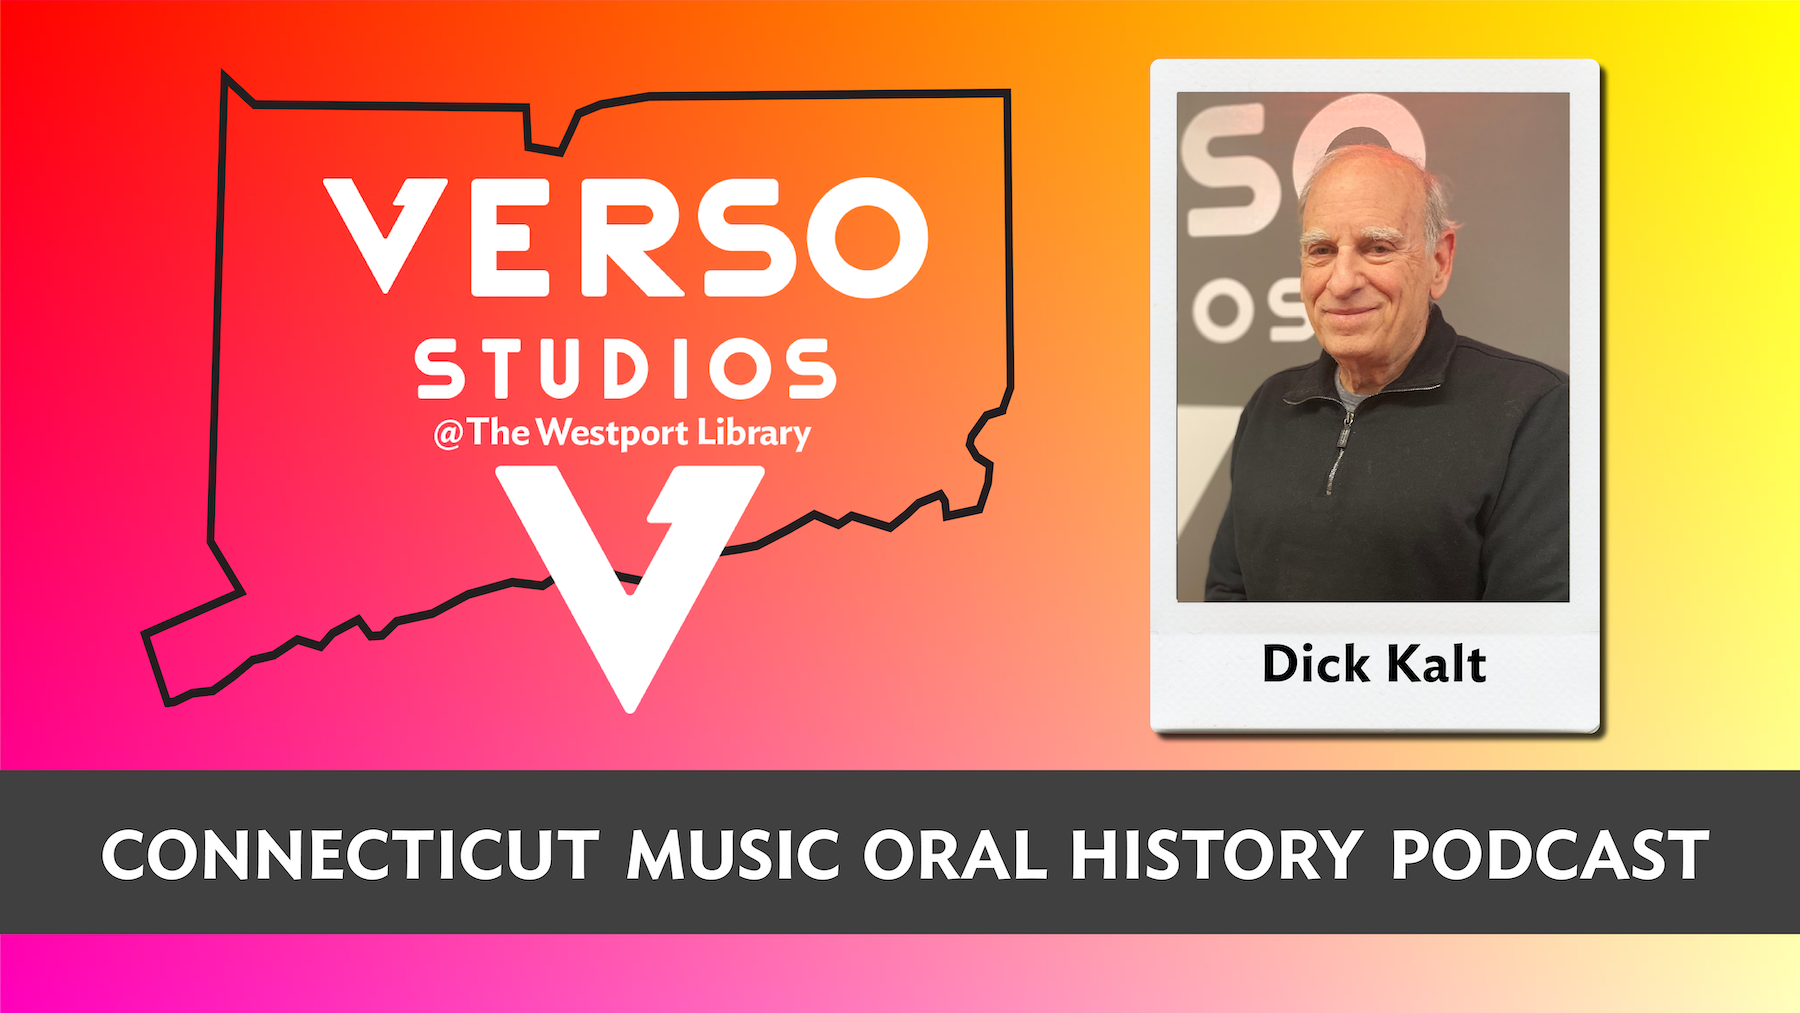 Dick Kalt, Connecticut Music Oral History Podcast, Verso Studios at Westport Library 11.29.21